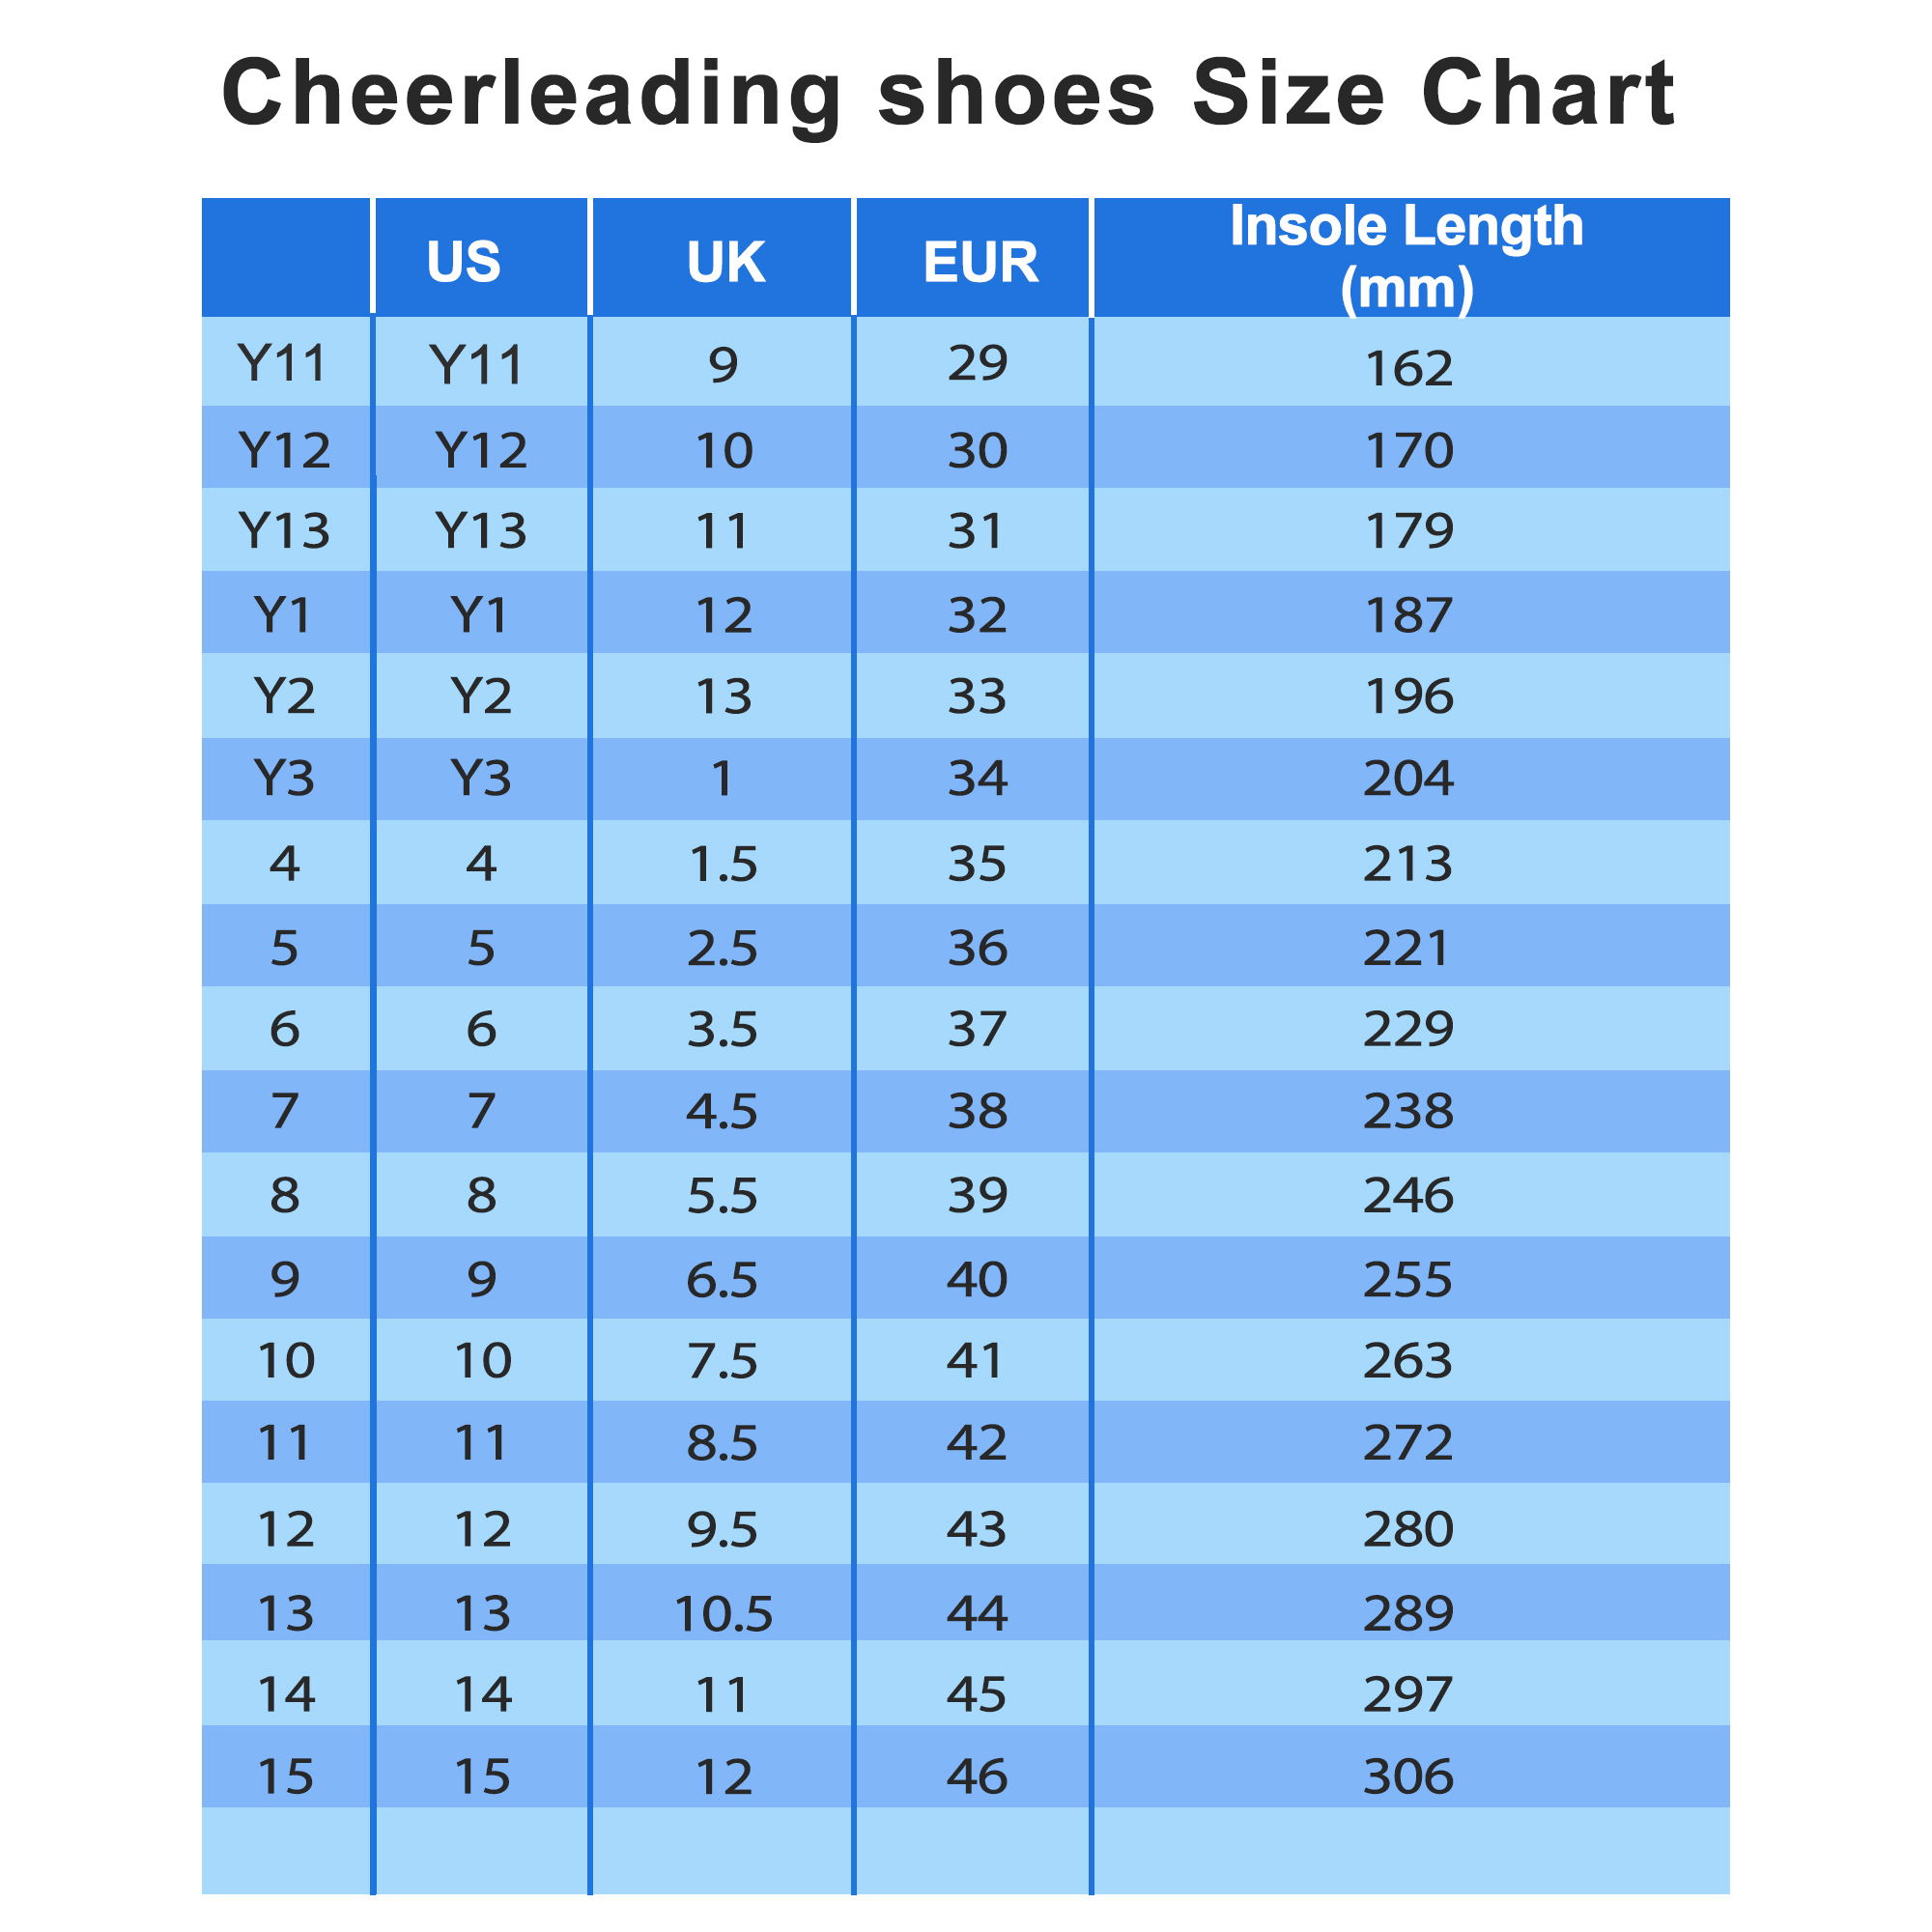 Cheerleading-shoes-size-chart